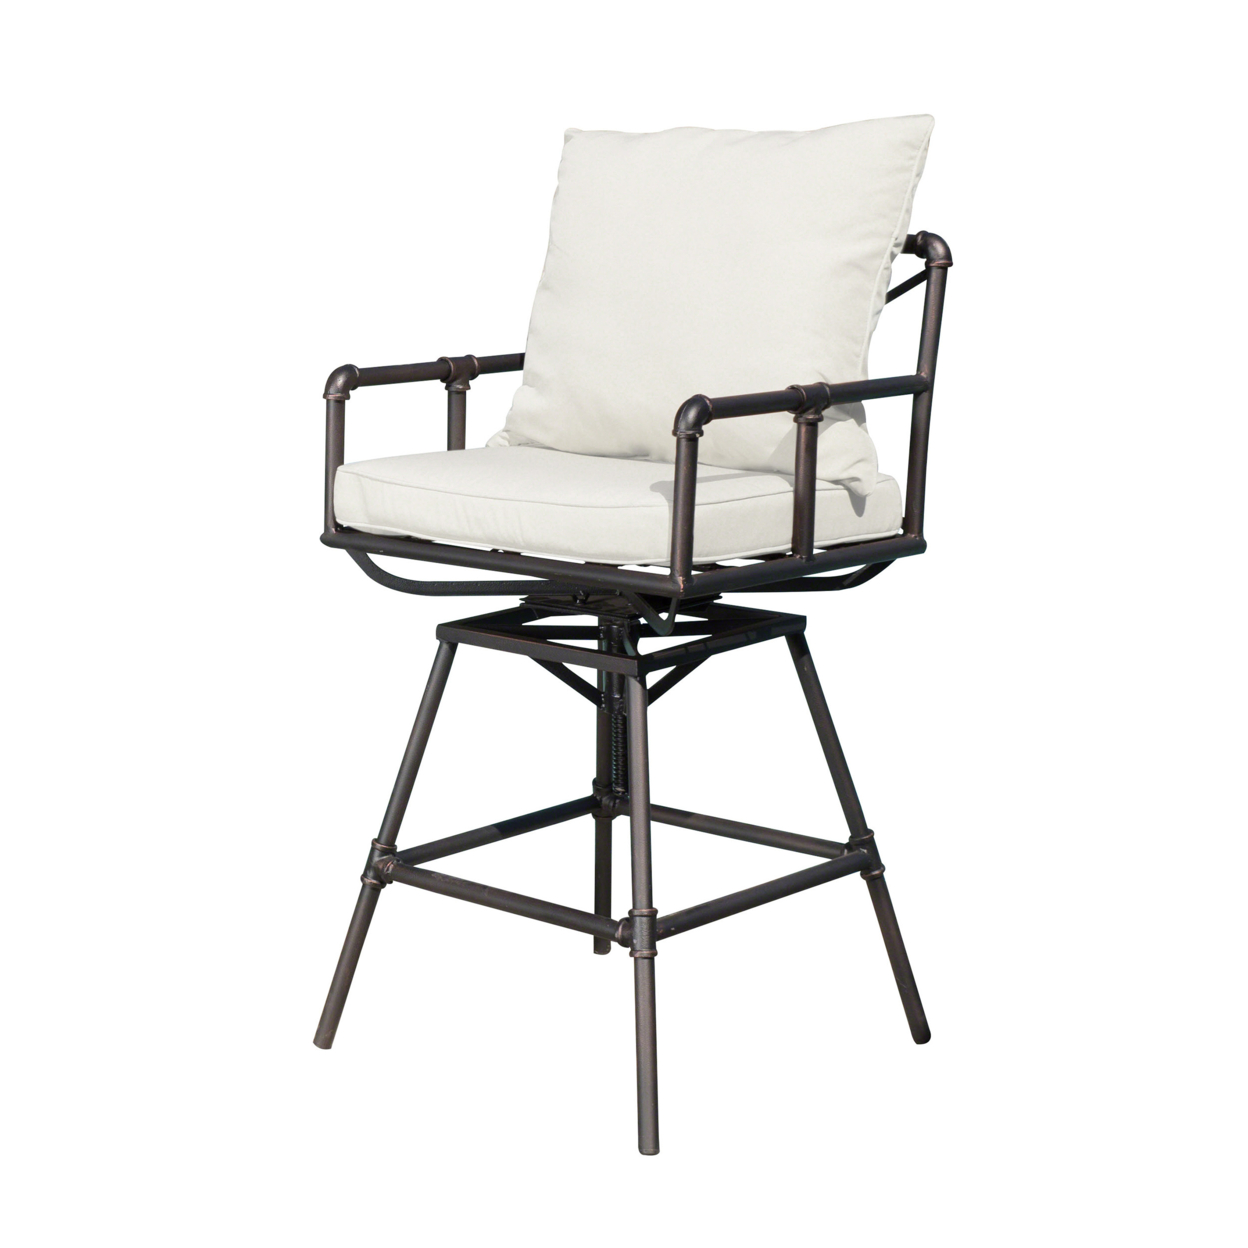 Varick Outdoor Adjustable Pipe Barstool With Cushions